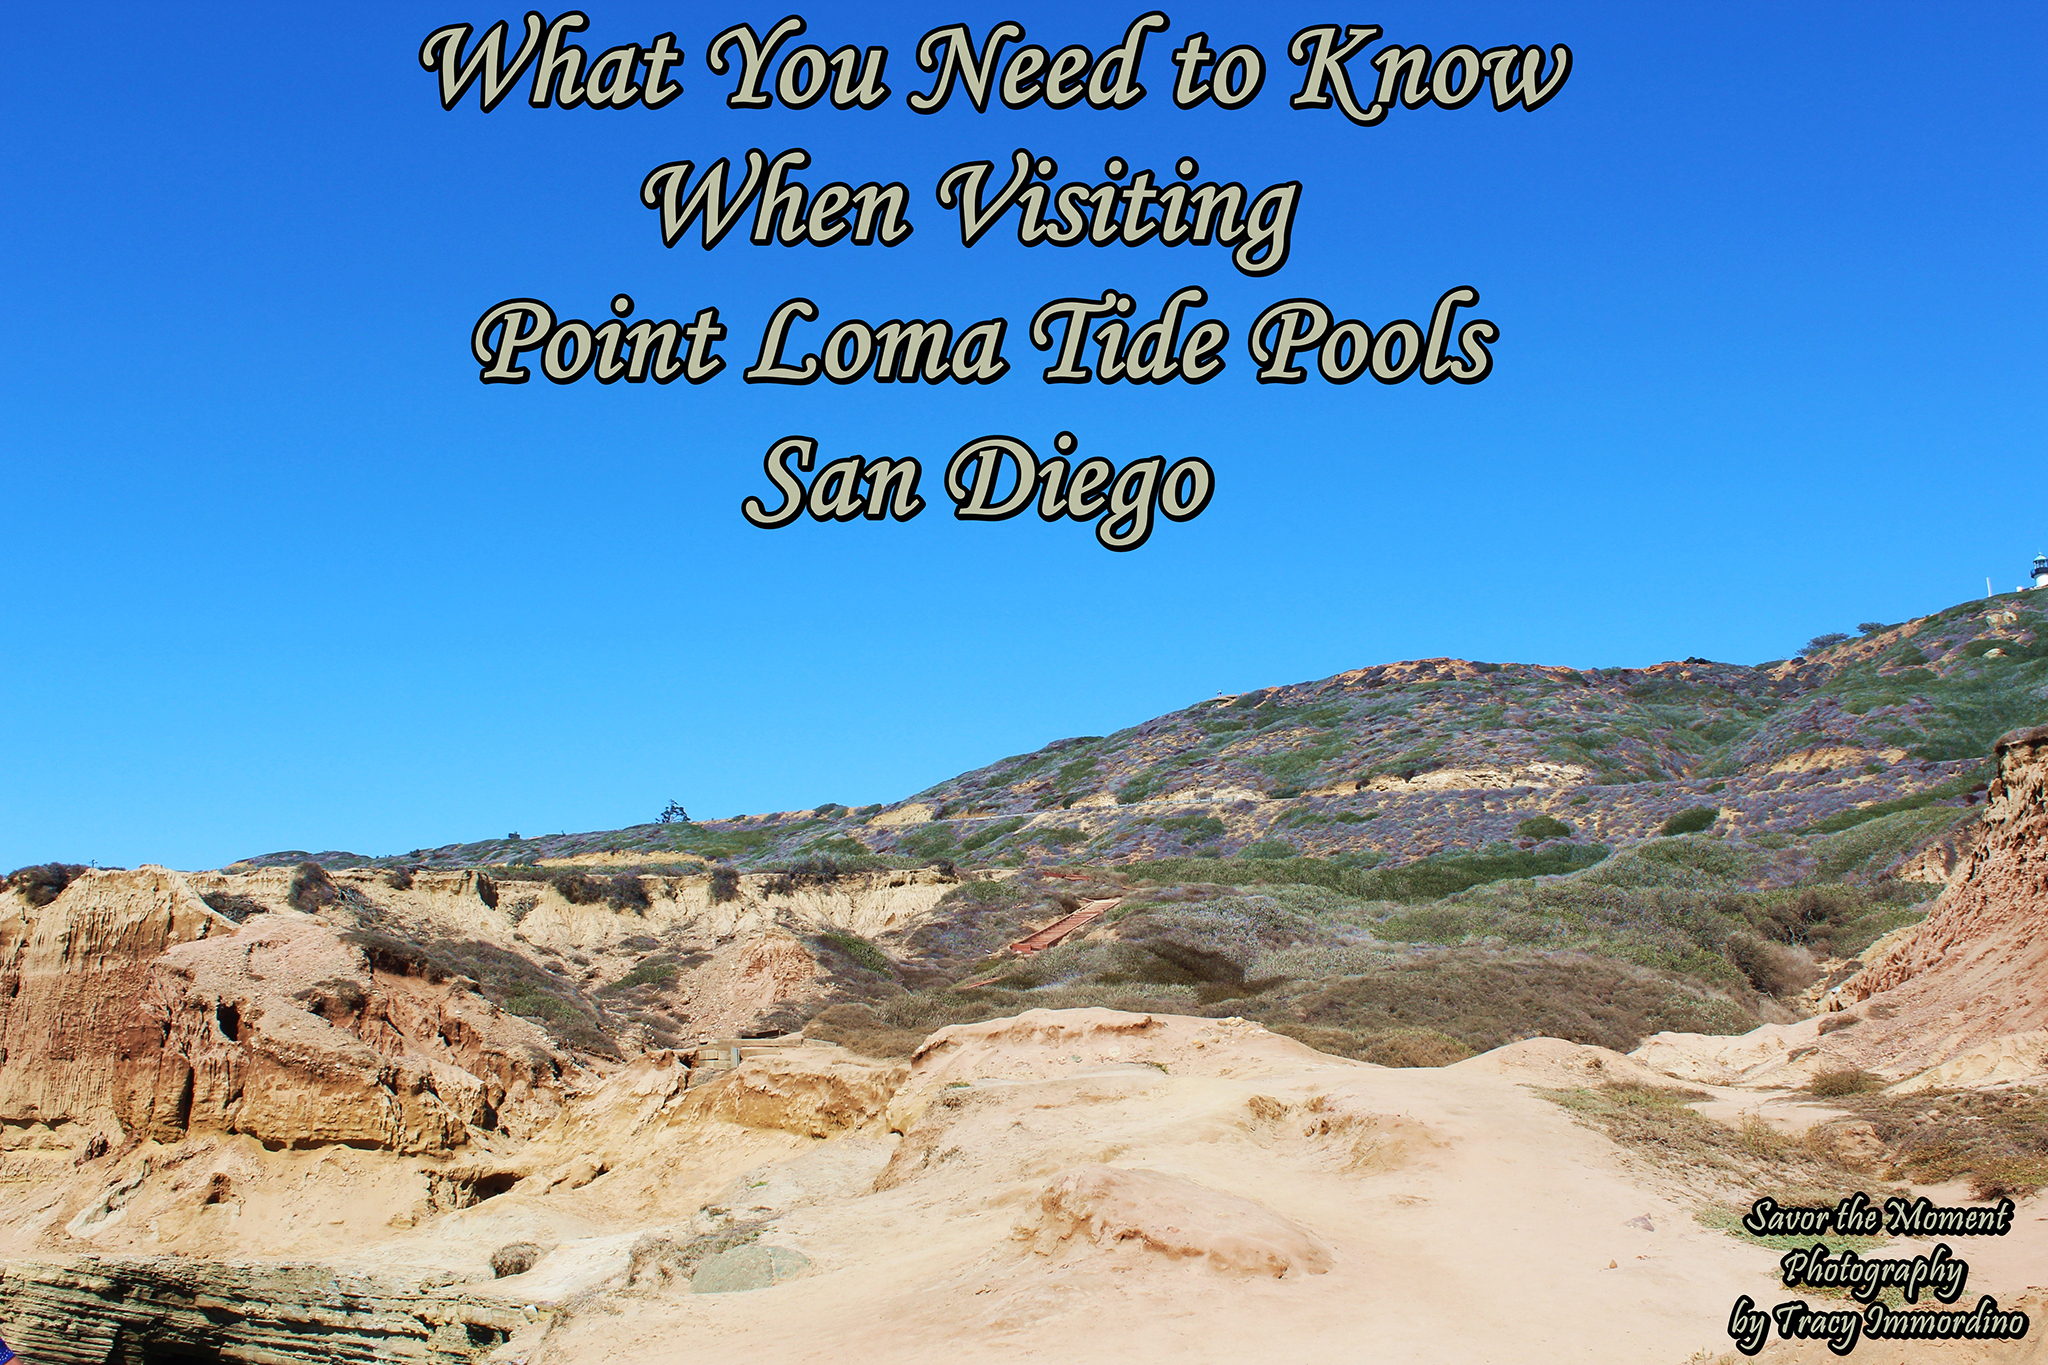 What You Need to Know When Visiting Point Loma Tide Pools